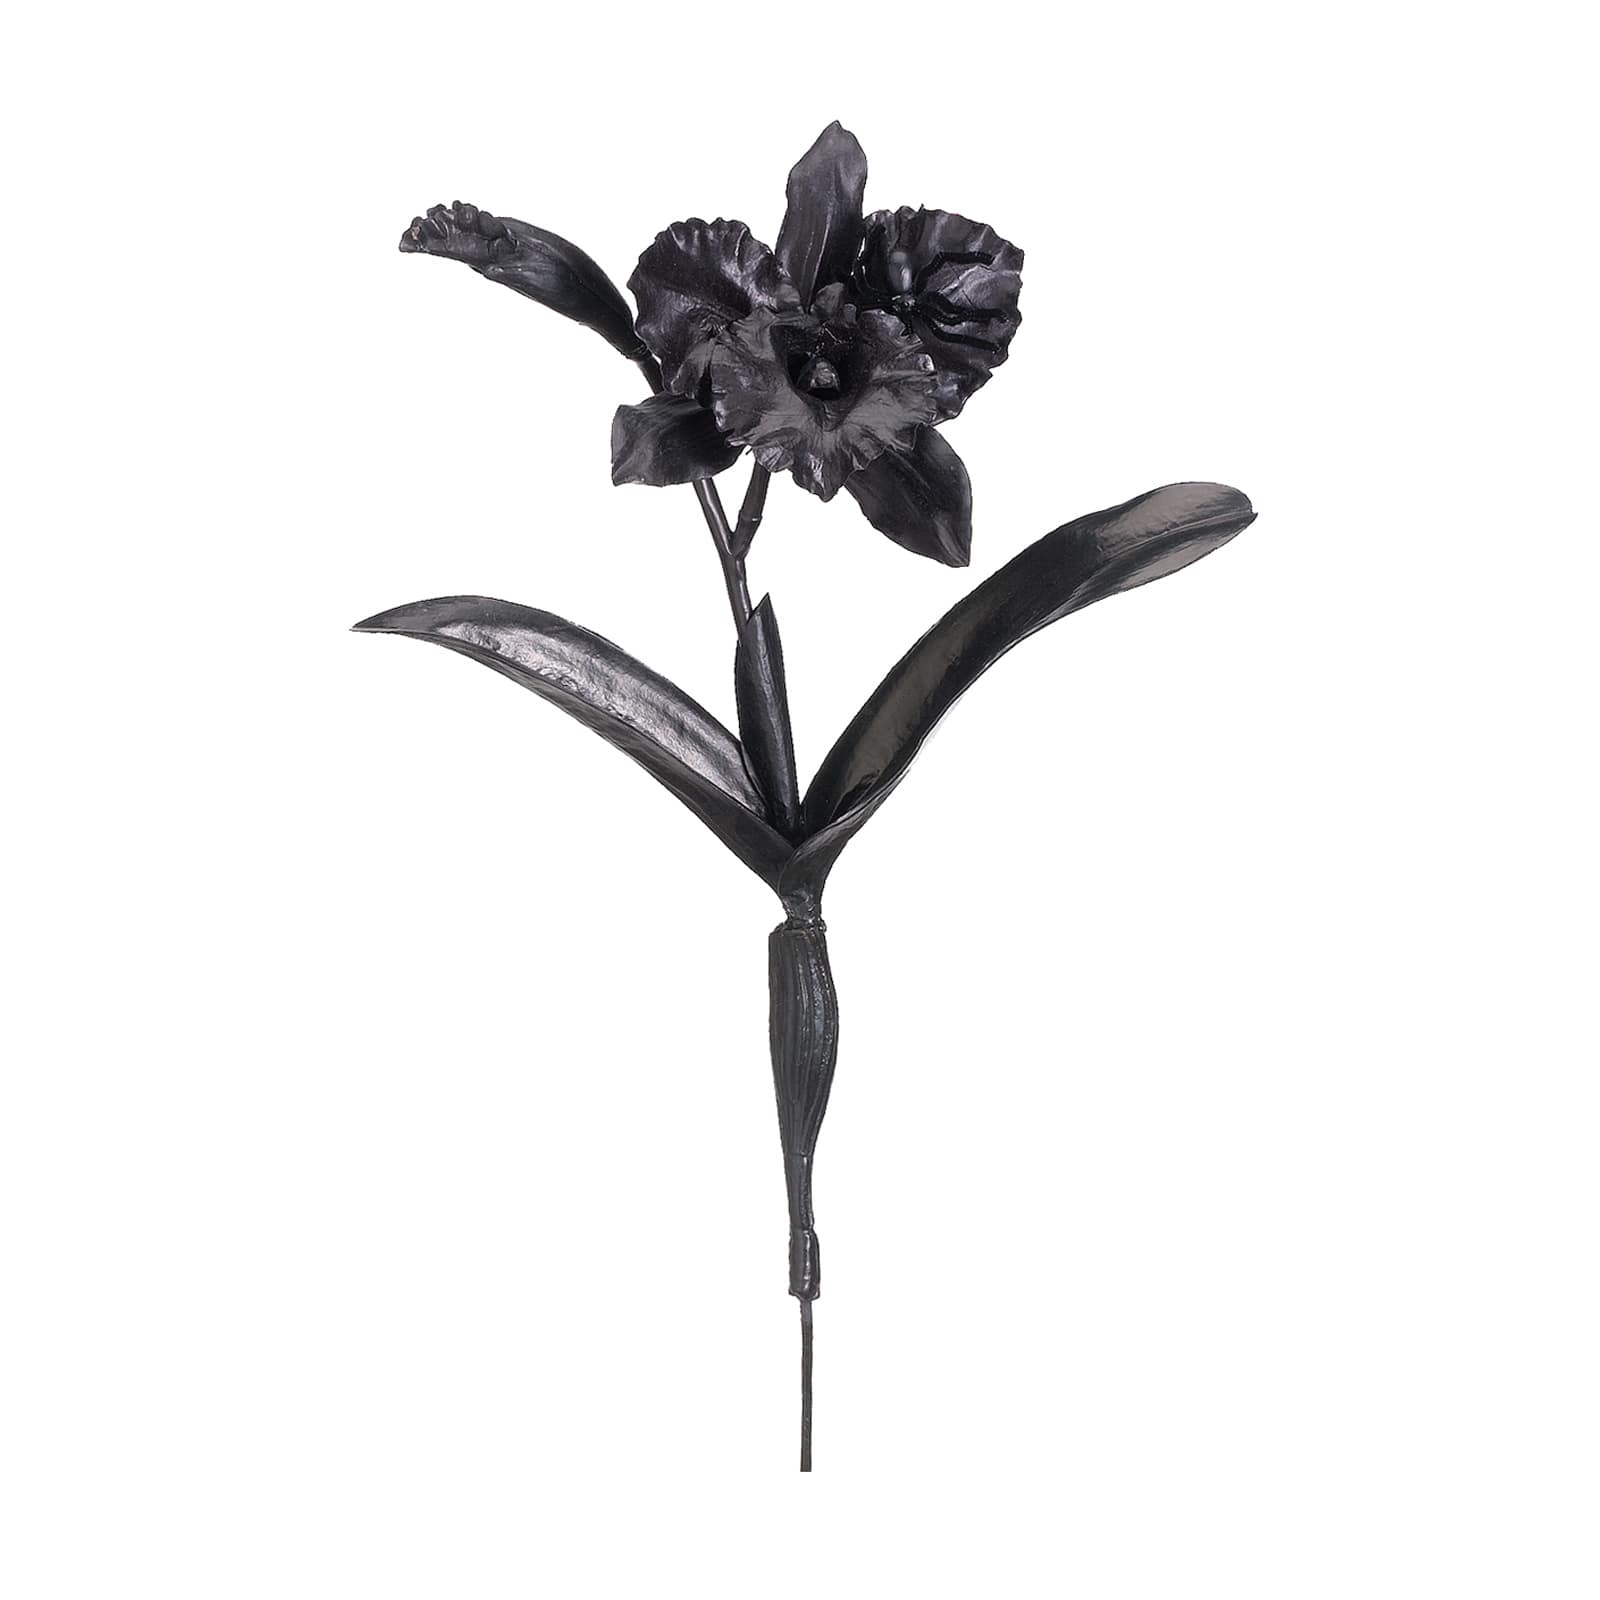 Purchase The Black Cattleya Orchid Spray With Spider At Michaels Com